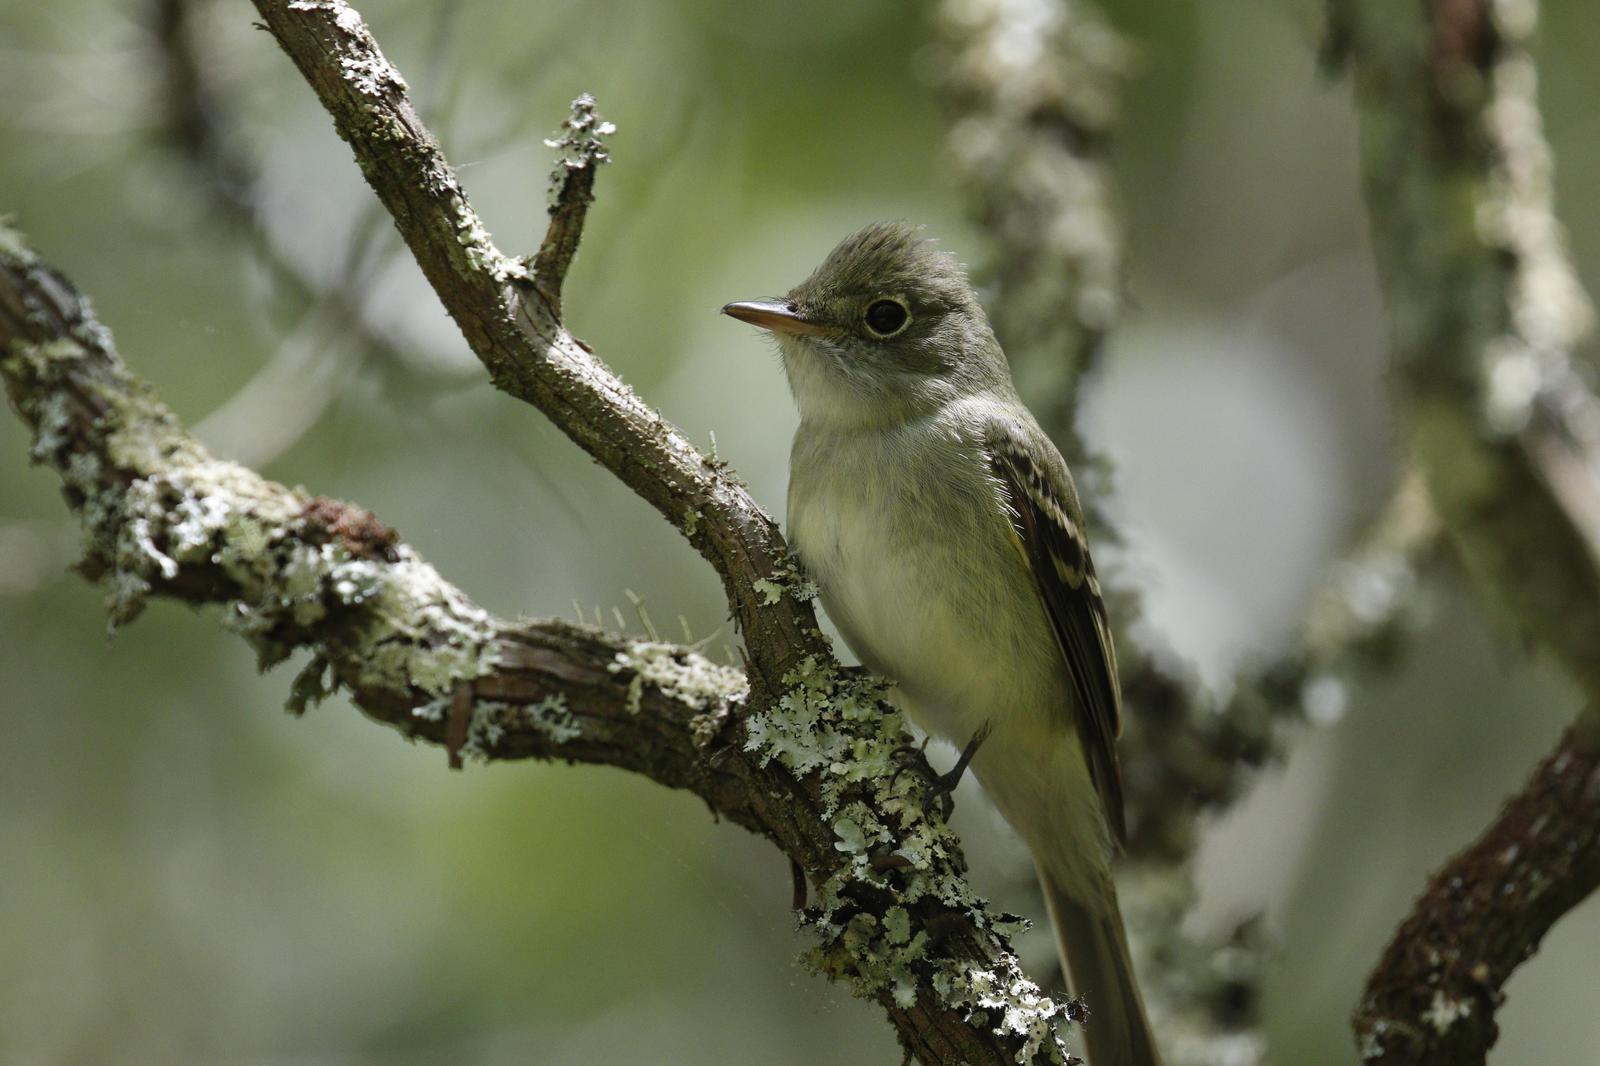 Acadian Flycatcher Photo by Emily Willoughby